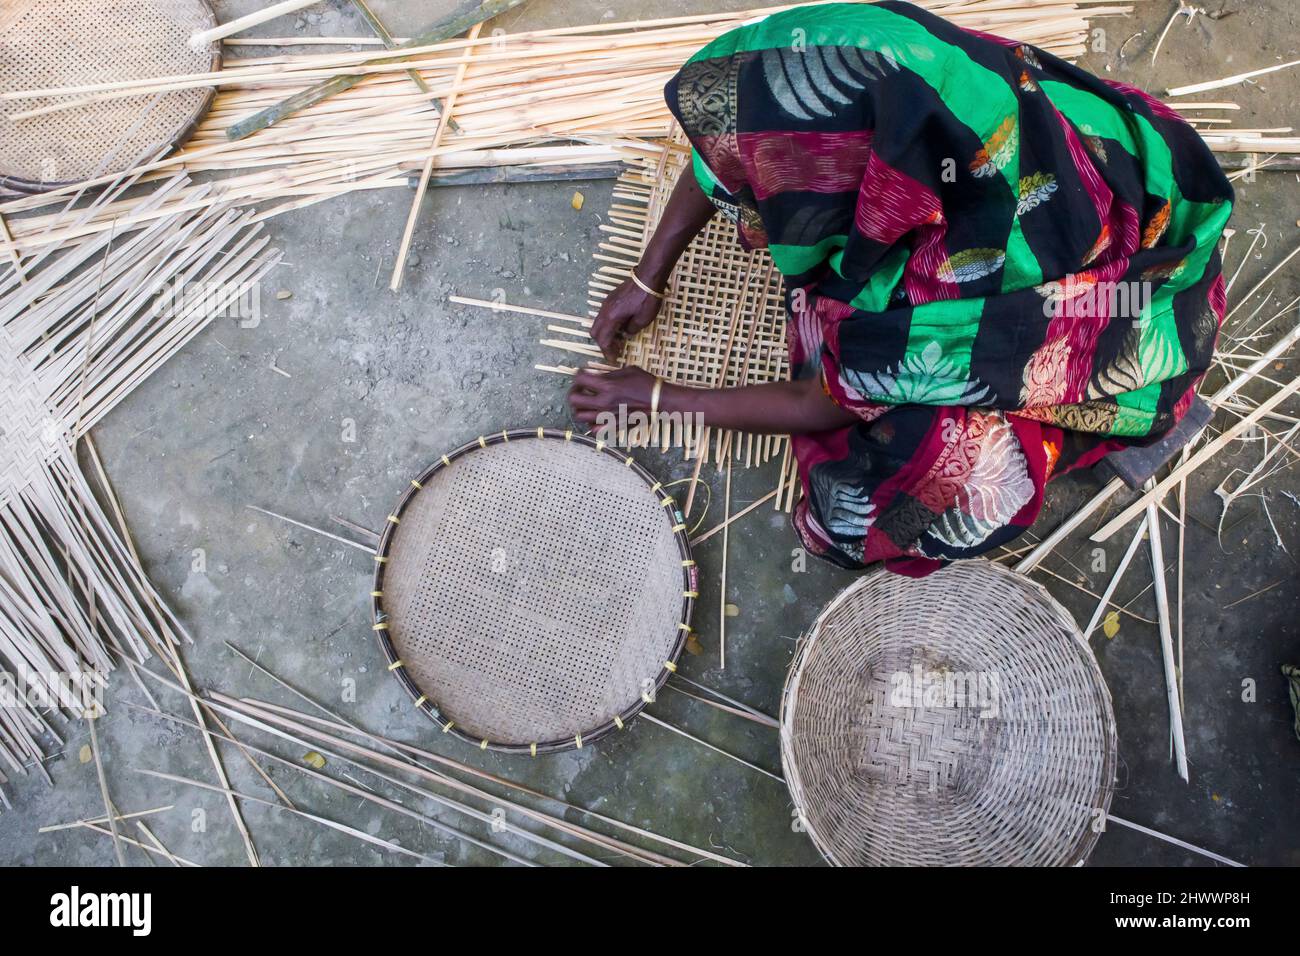 A woman entrepreneur is showing her basket made with Bamboo in the Netrkona district of Bangladesh. It is also helping other women to earn money. Stock Photo